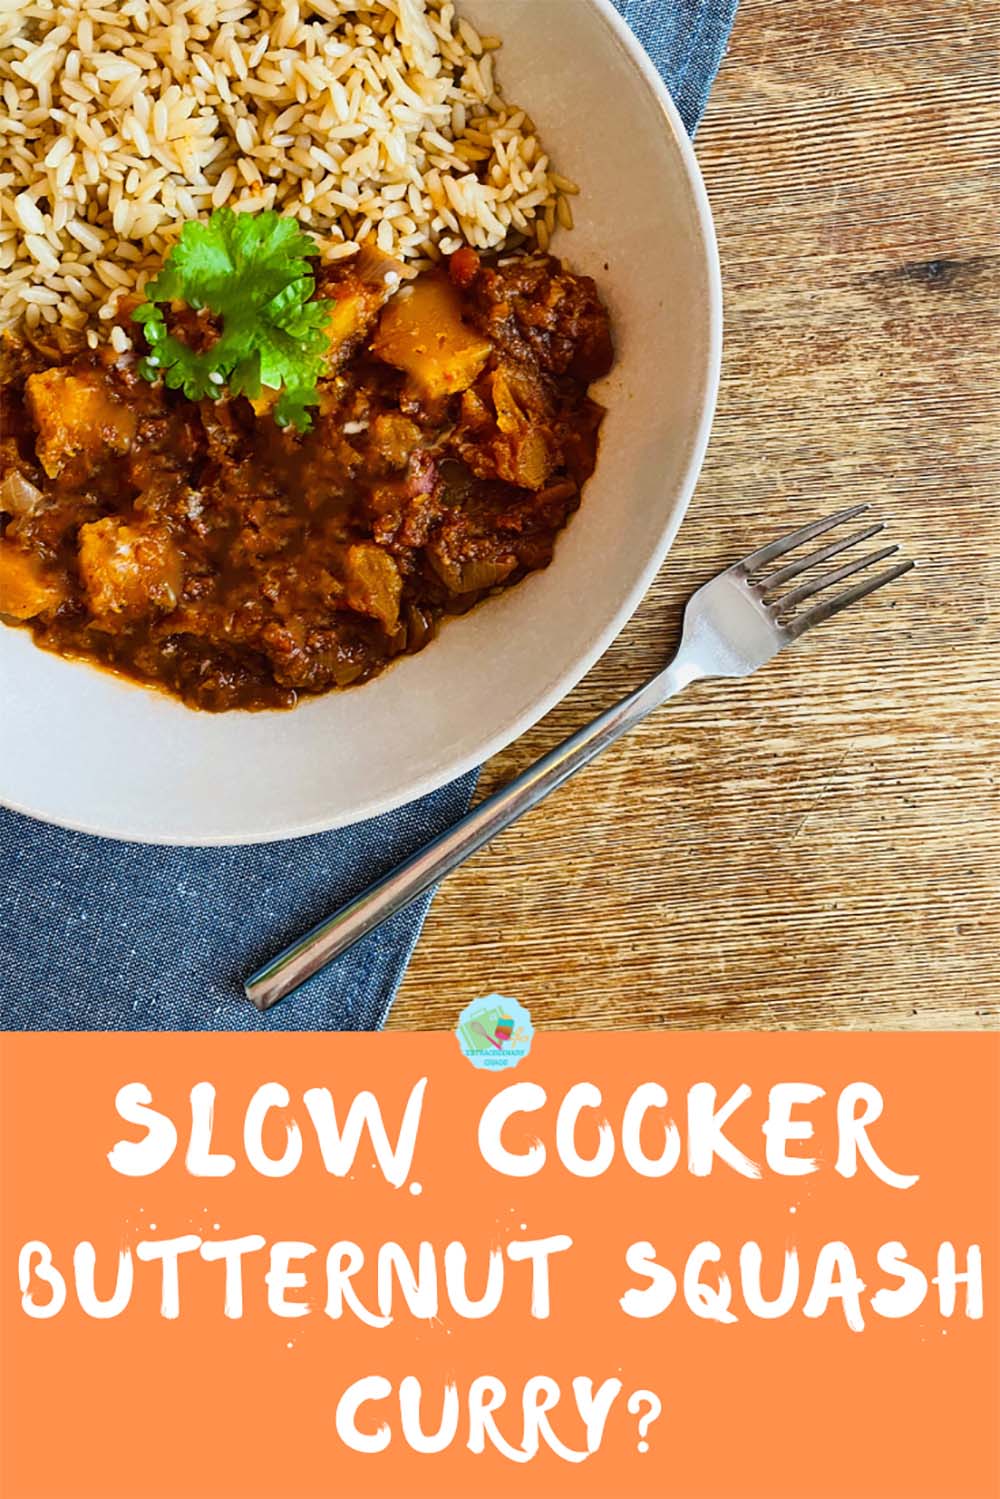 Slow cooker Butternut squash curry